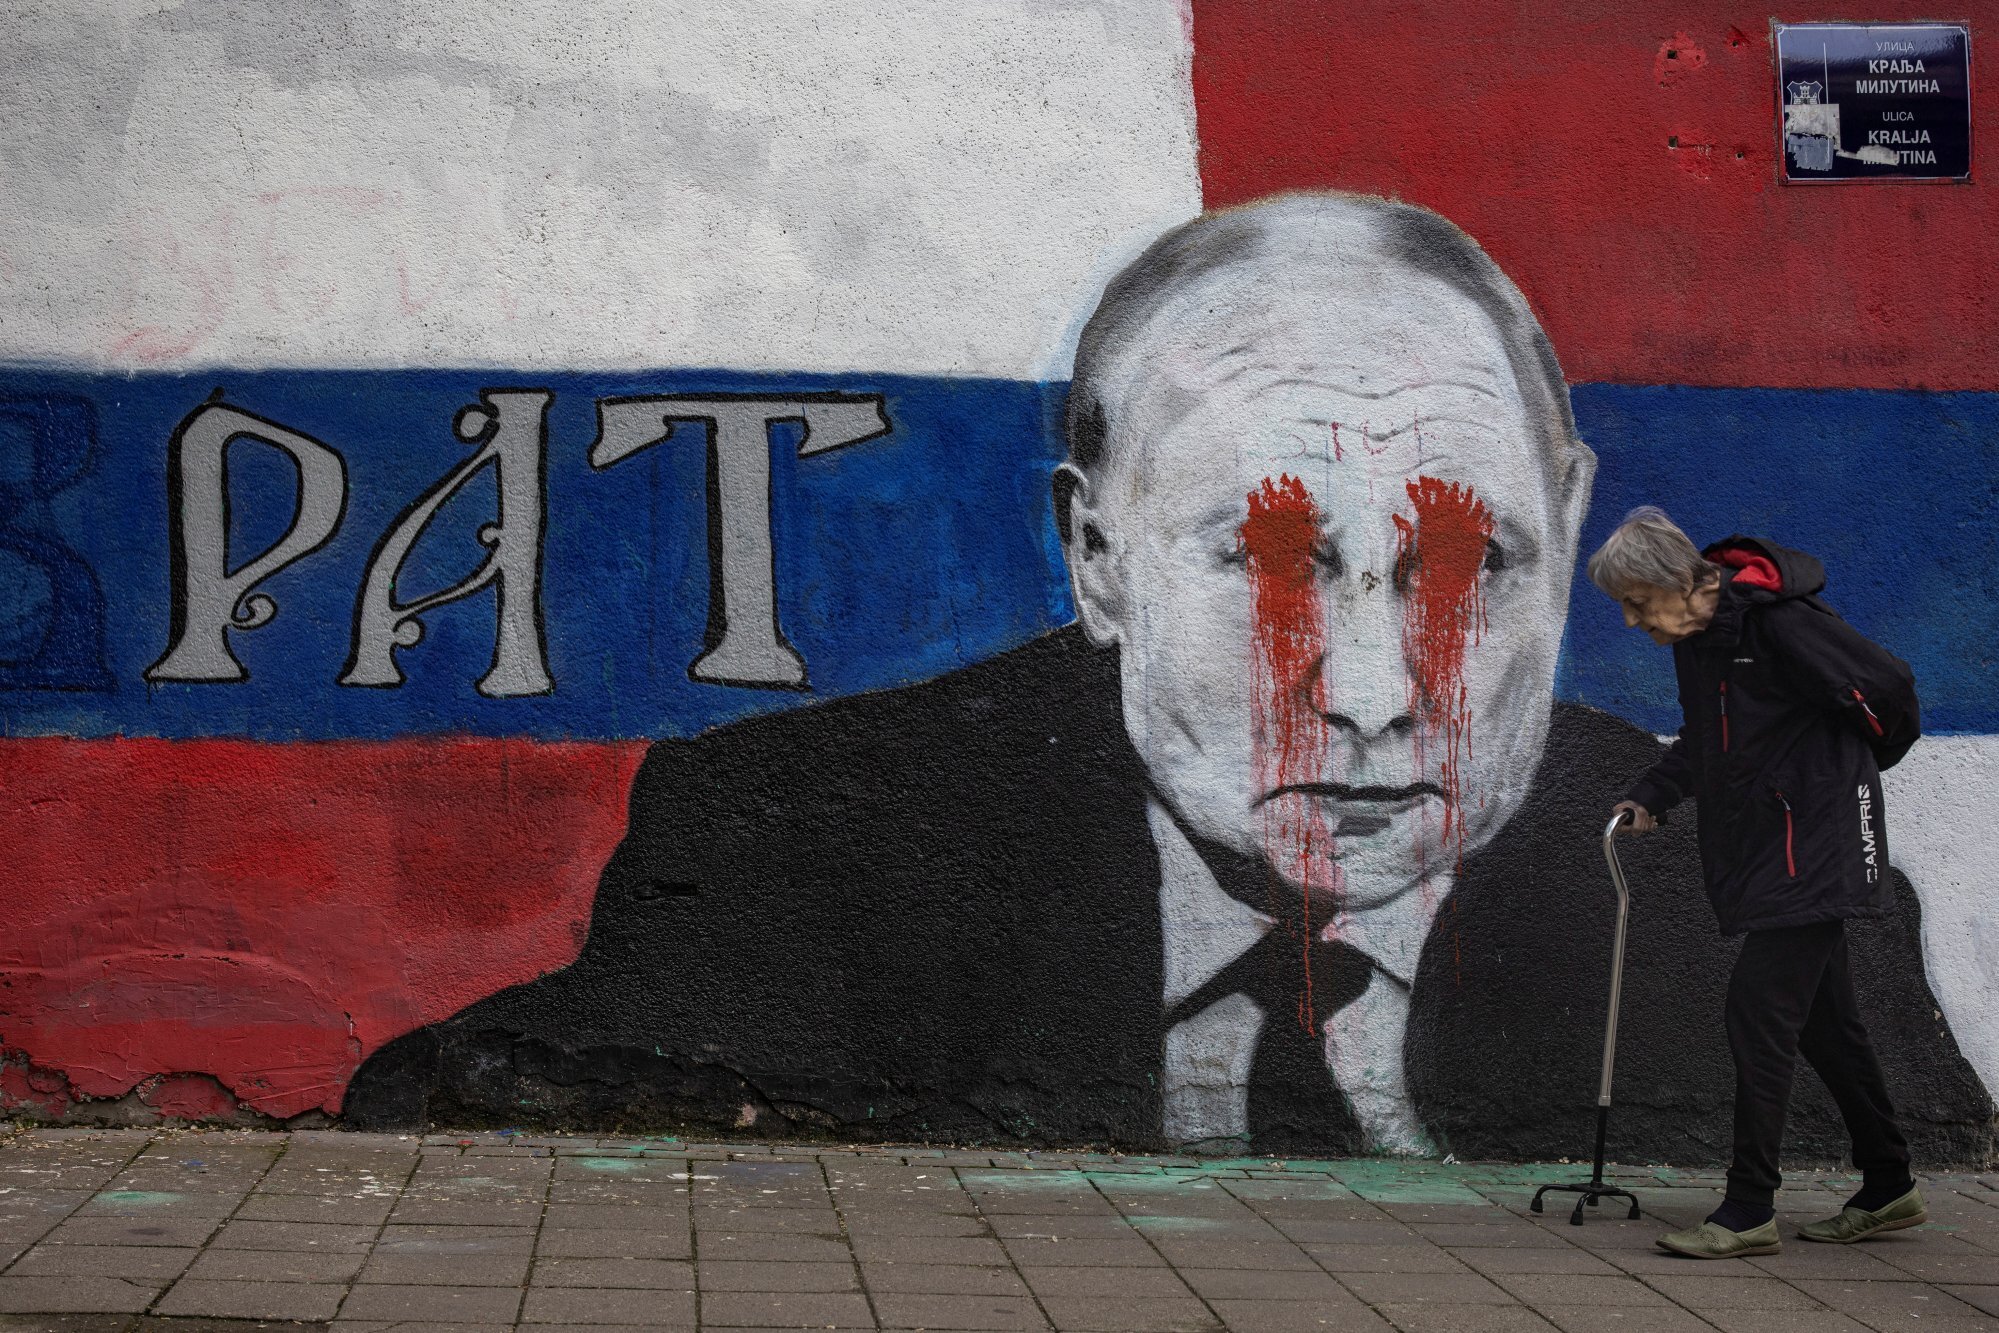 A person walks next to a mural of Russian President Vladimir Putin, which has been vandalised with red paint and the word “War” written instead of the original text reading “Brother”, in Belgrade, Serbia on Friday. Photo: Reuters